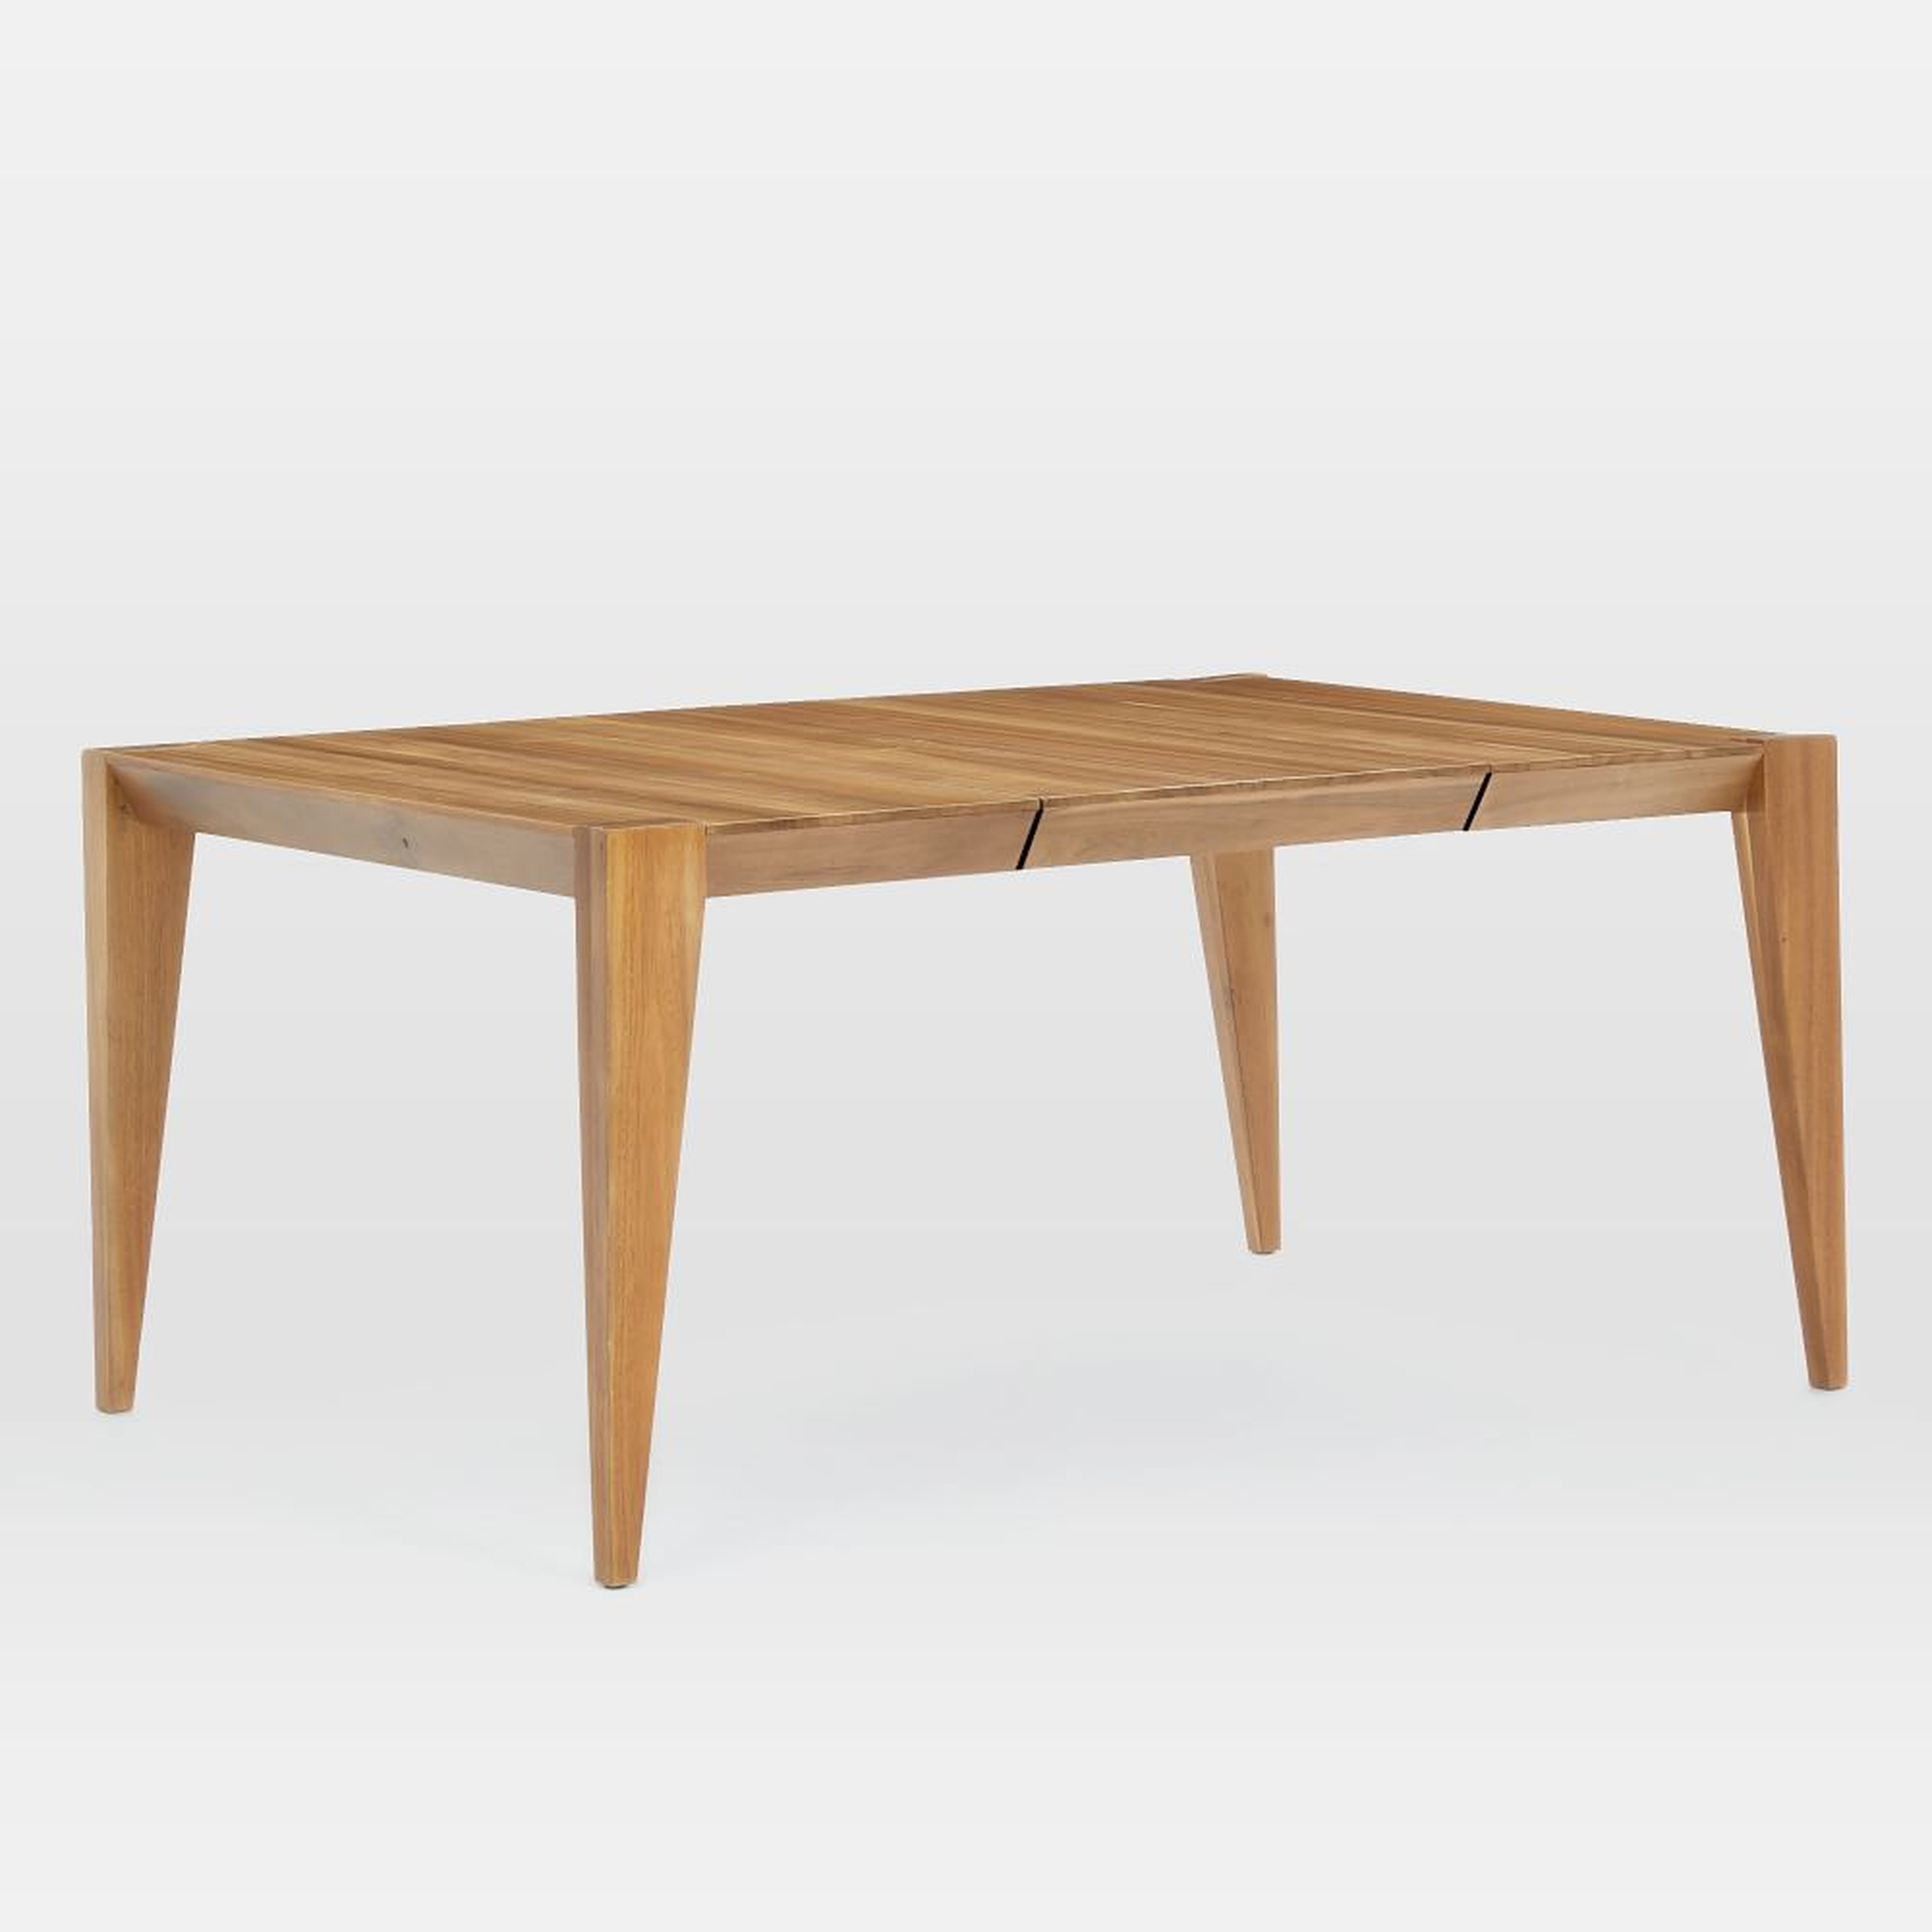 Anderson 42-90" Expandable Dining Table, Caramel - West Elm